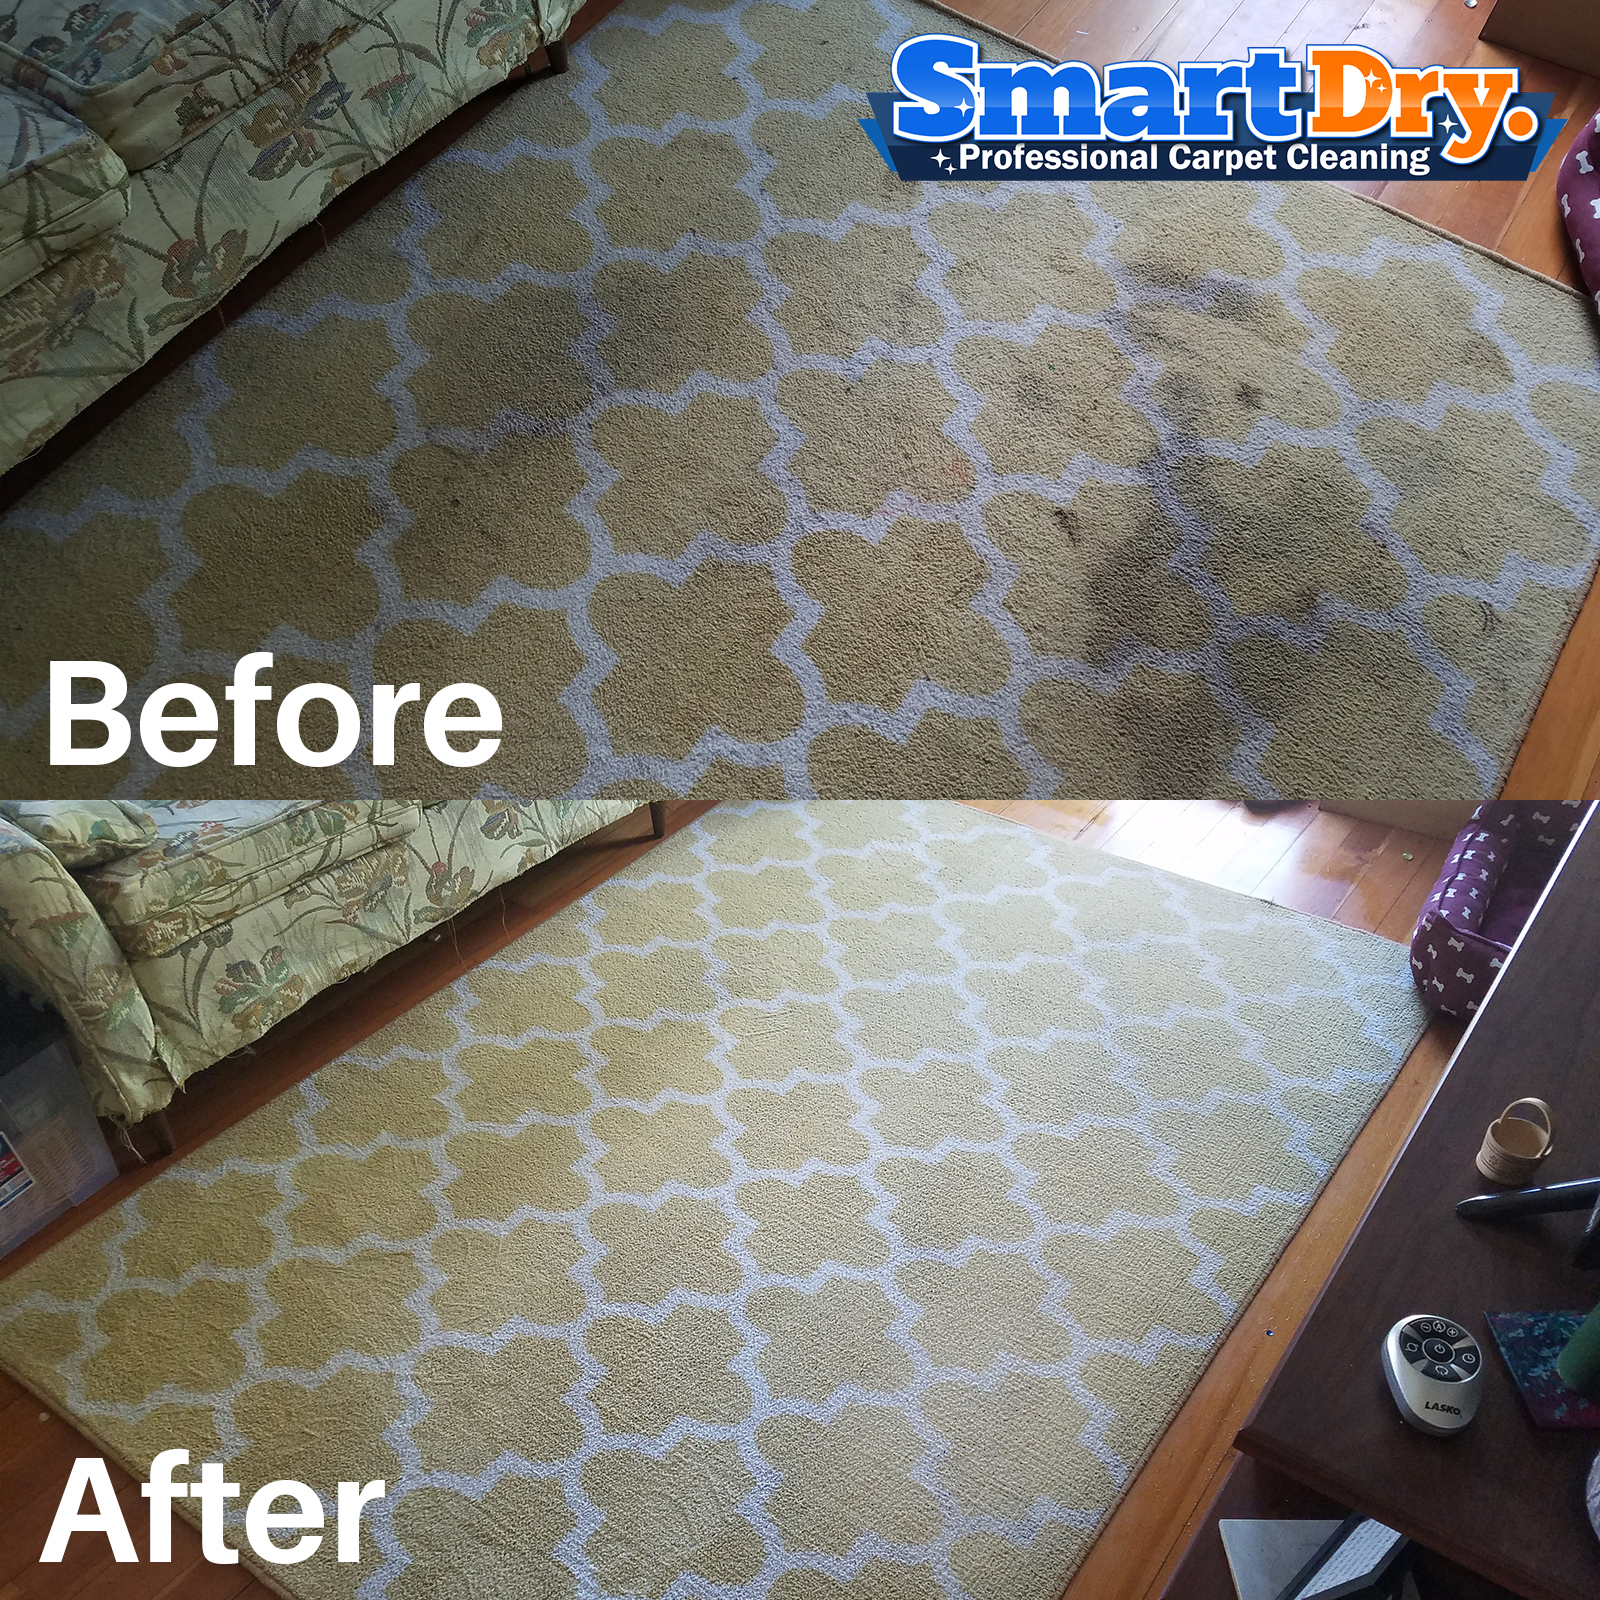 Carpet Cleaning San Diego Carpet Cleaners San Diego Ca